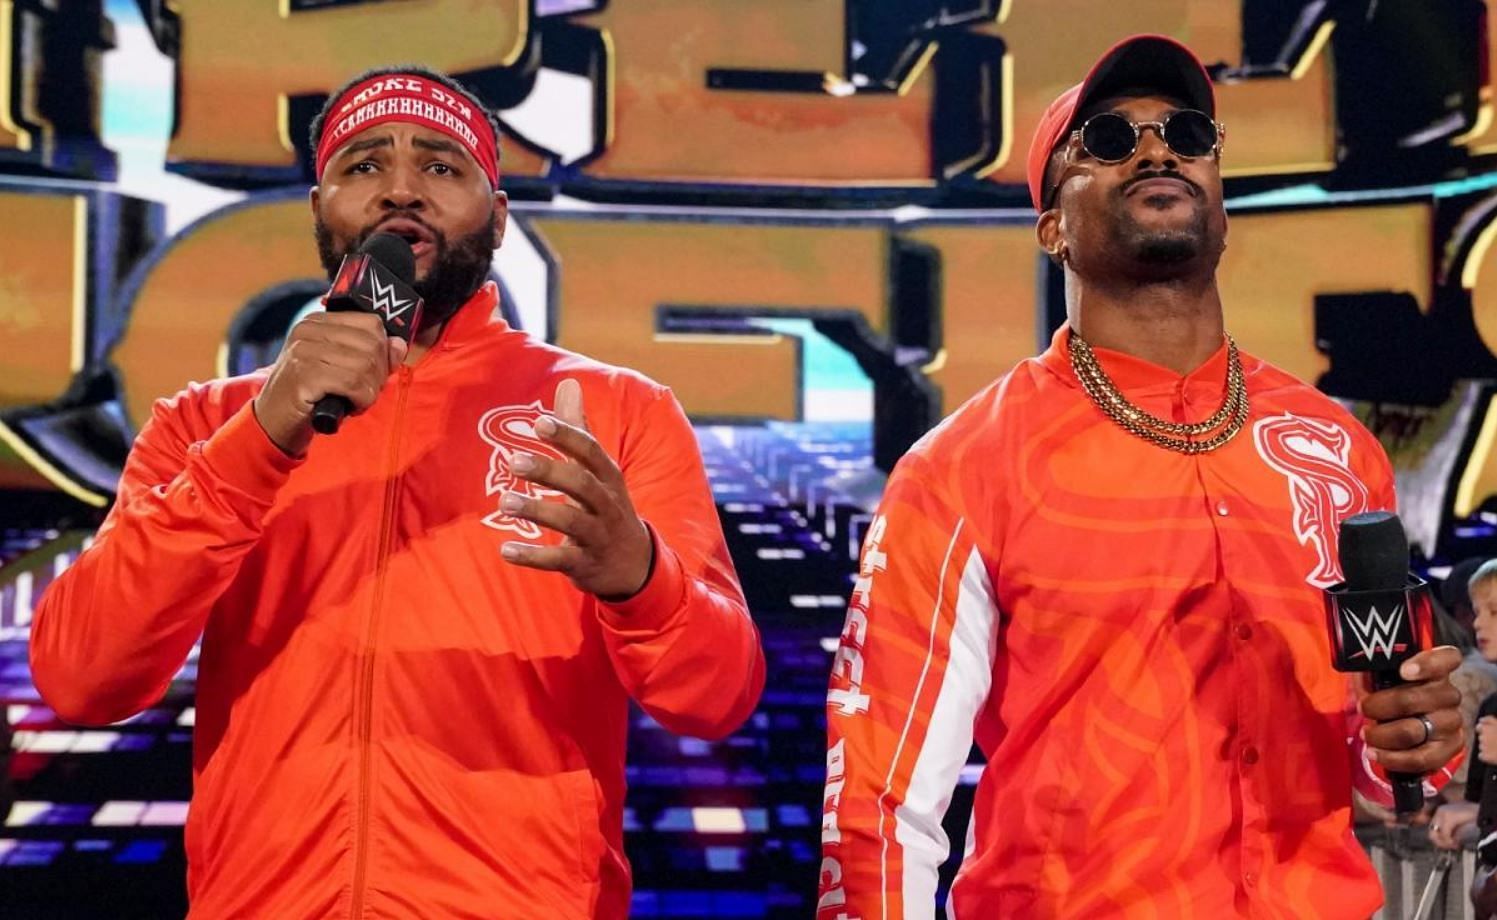 The Street Profits are one of the top teams in WWE.